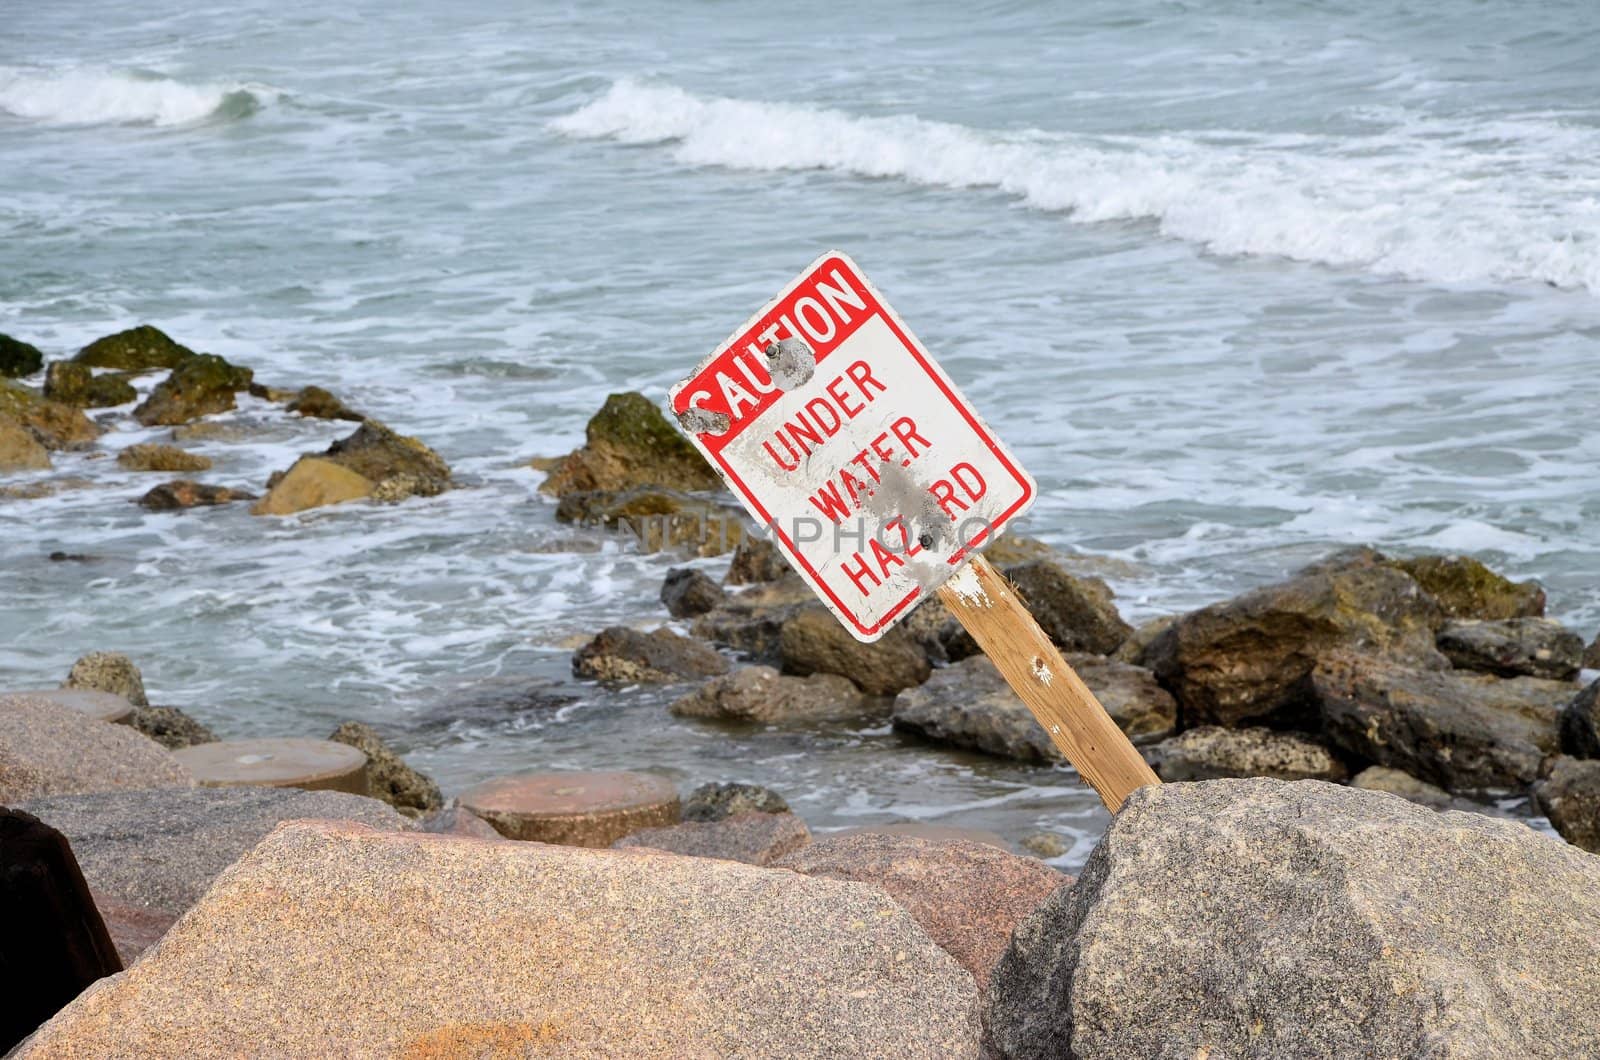 A caution sign along the rocky shore in North Carolina